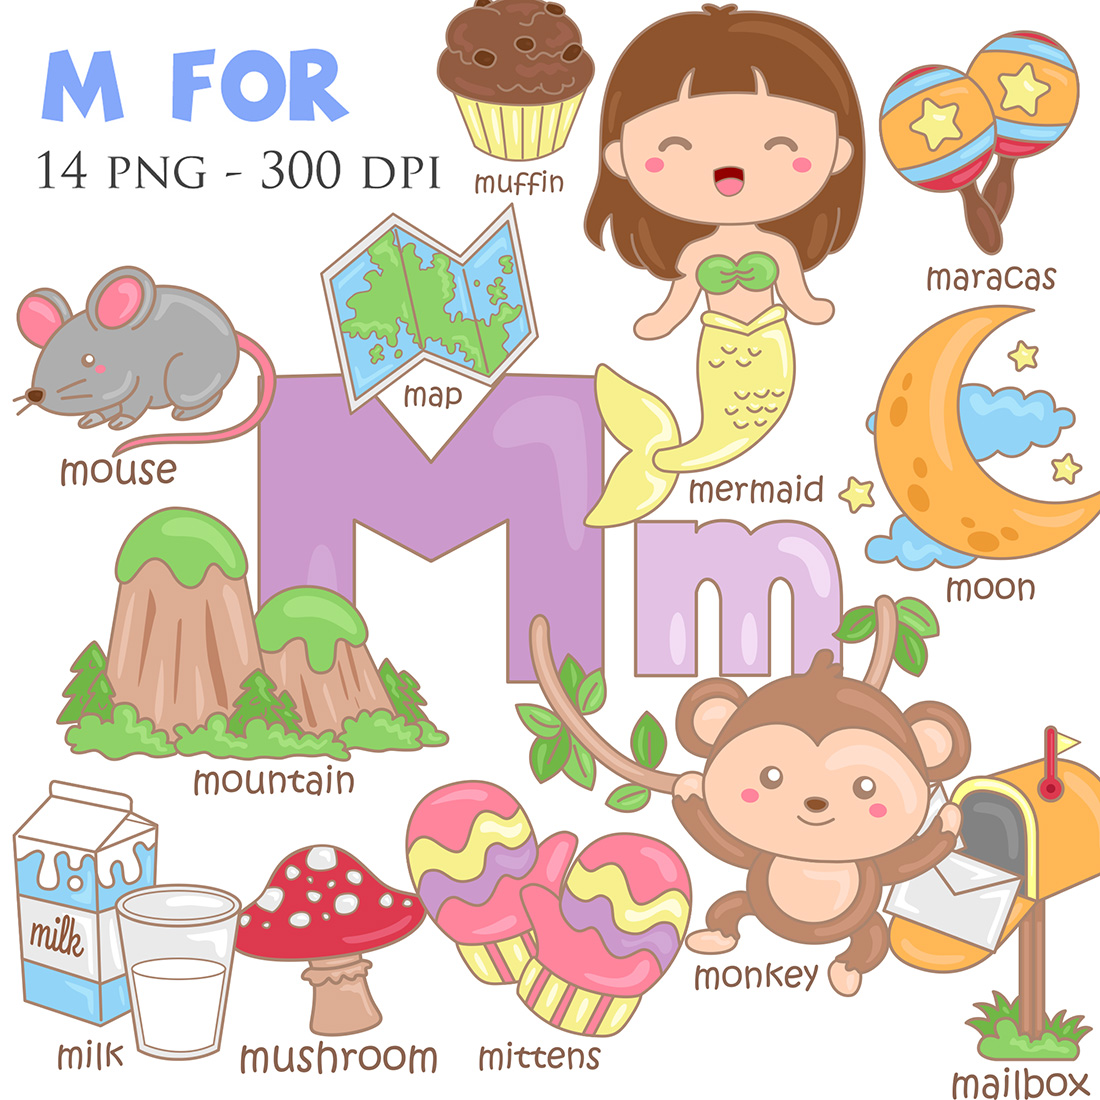 Alphabet M For Vocabulary School Letter Reading Writing Font Study Learning Student Toodler Kids Cartoon Mouse Monkey Mermaid Mountain Milk Mushroom Mittens Mailbox Moon Maracas Muffin Map Illustration Vector Clipart cover image.